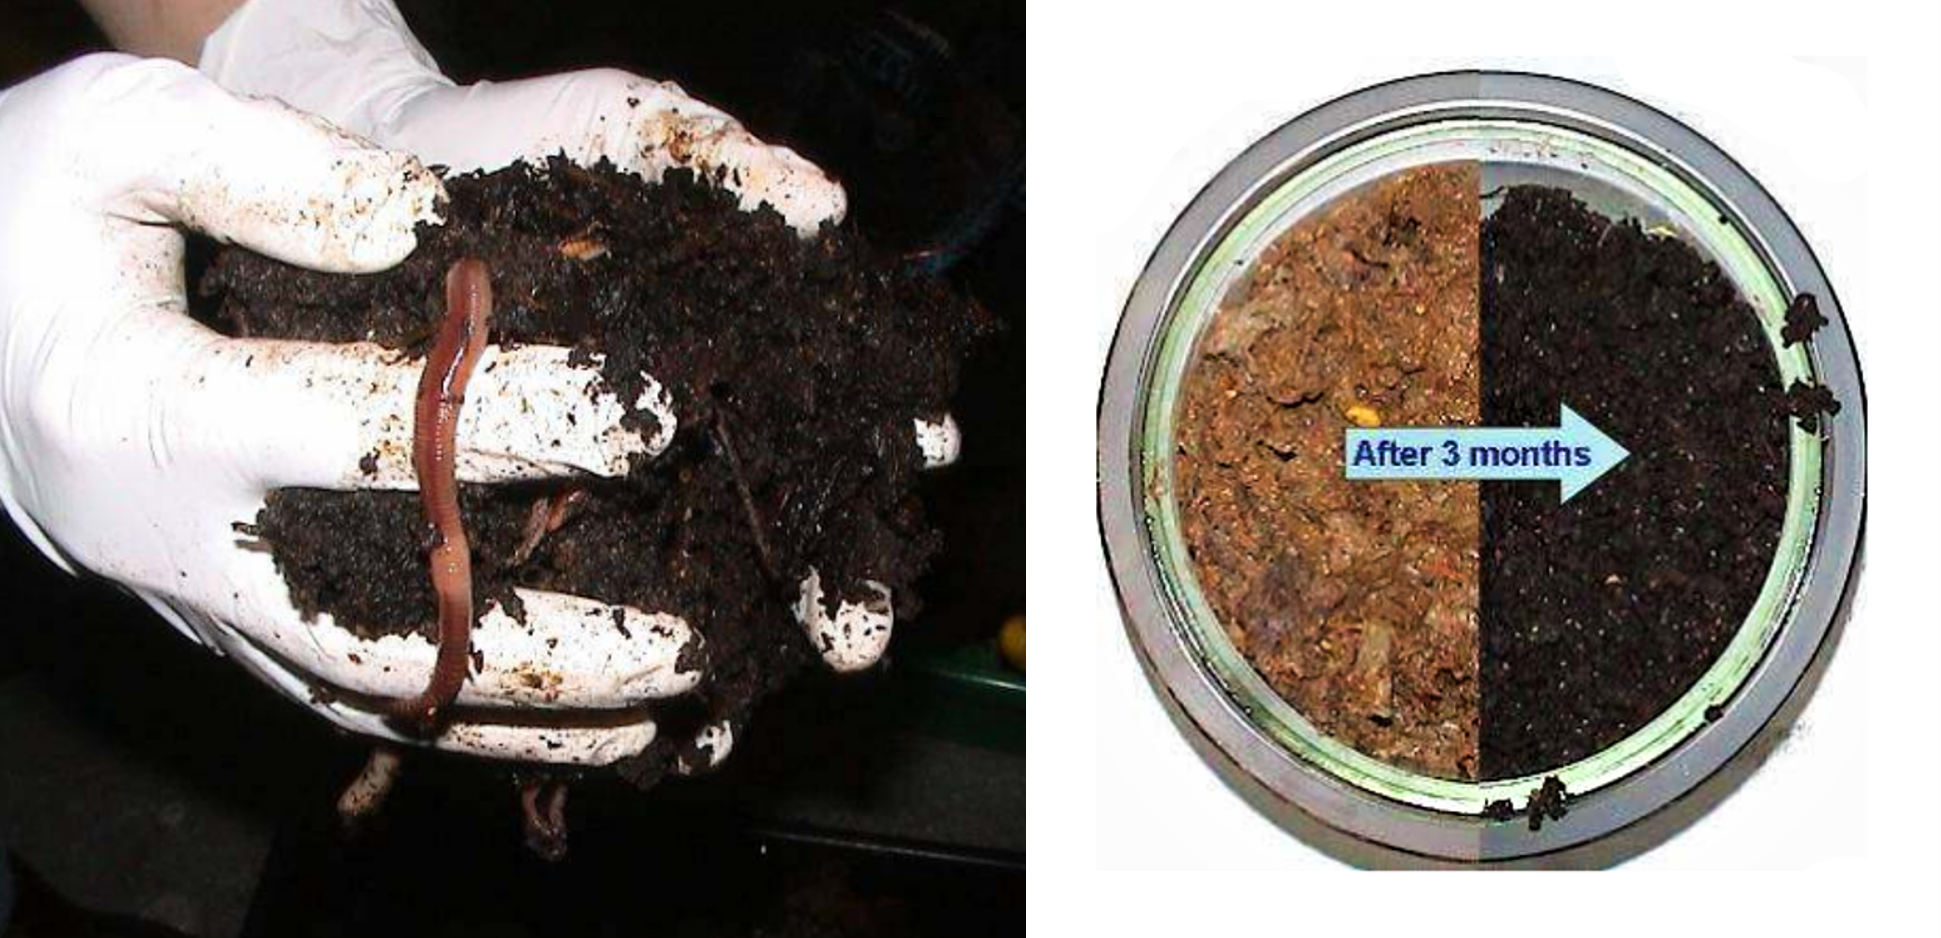 Vermicompost (left) transforms the lacto-fermented kitchen waste and excreta (right) into the black carbon- and fertiliser-rich terra preta. Source: OTTERPOHL (n.y. b)